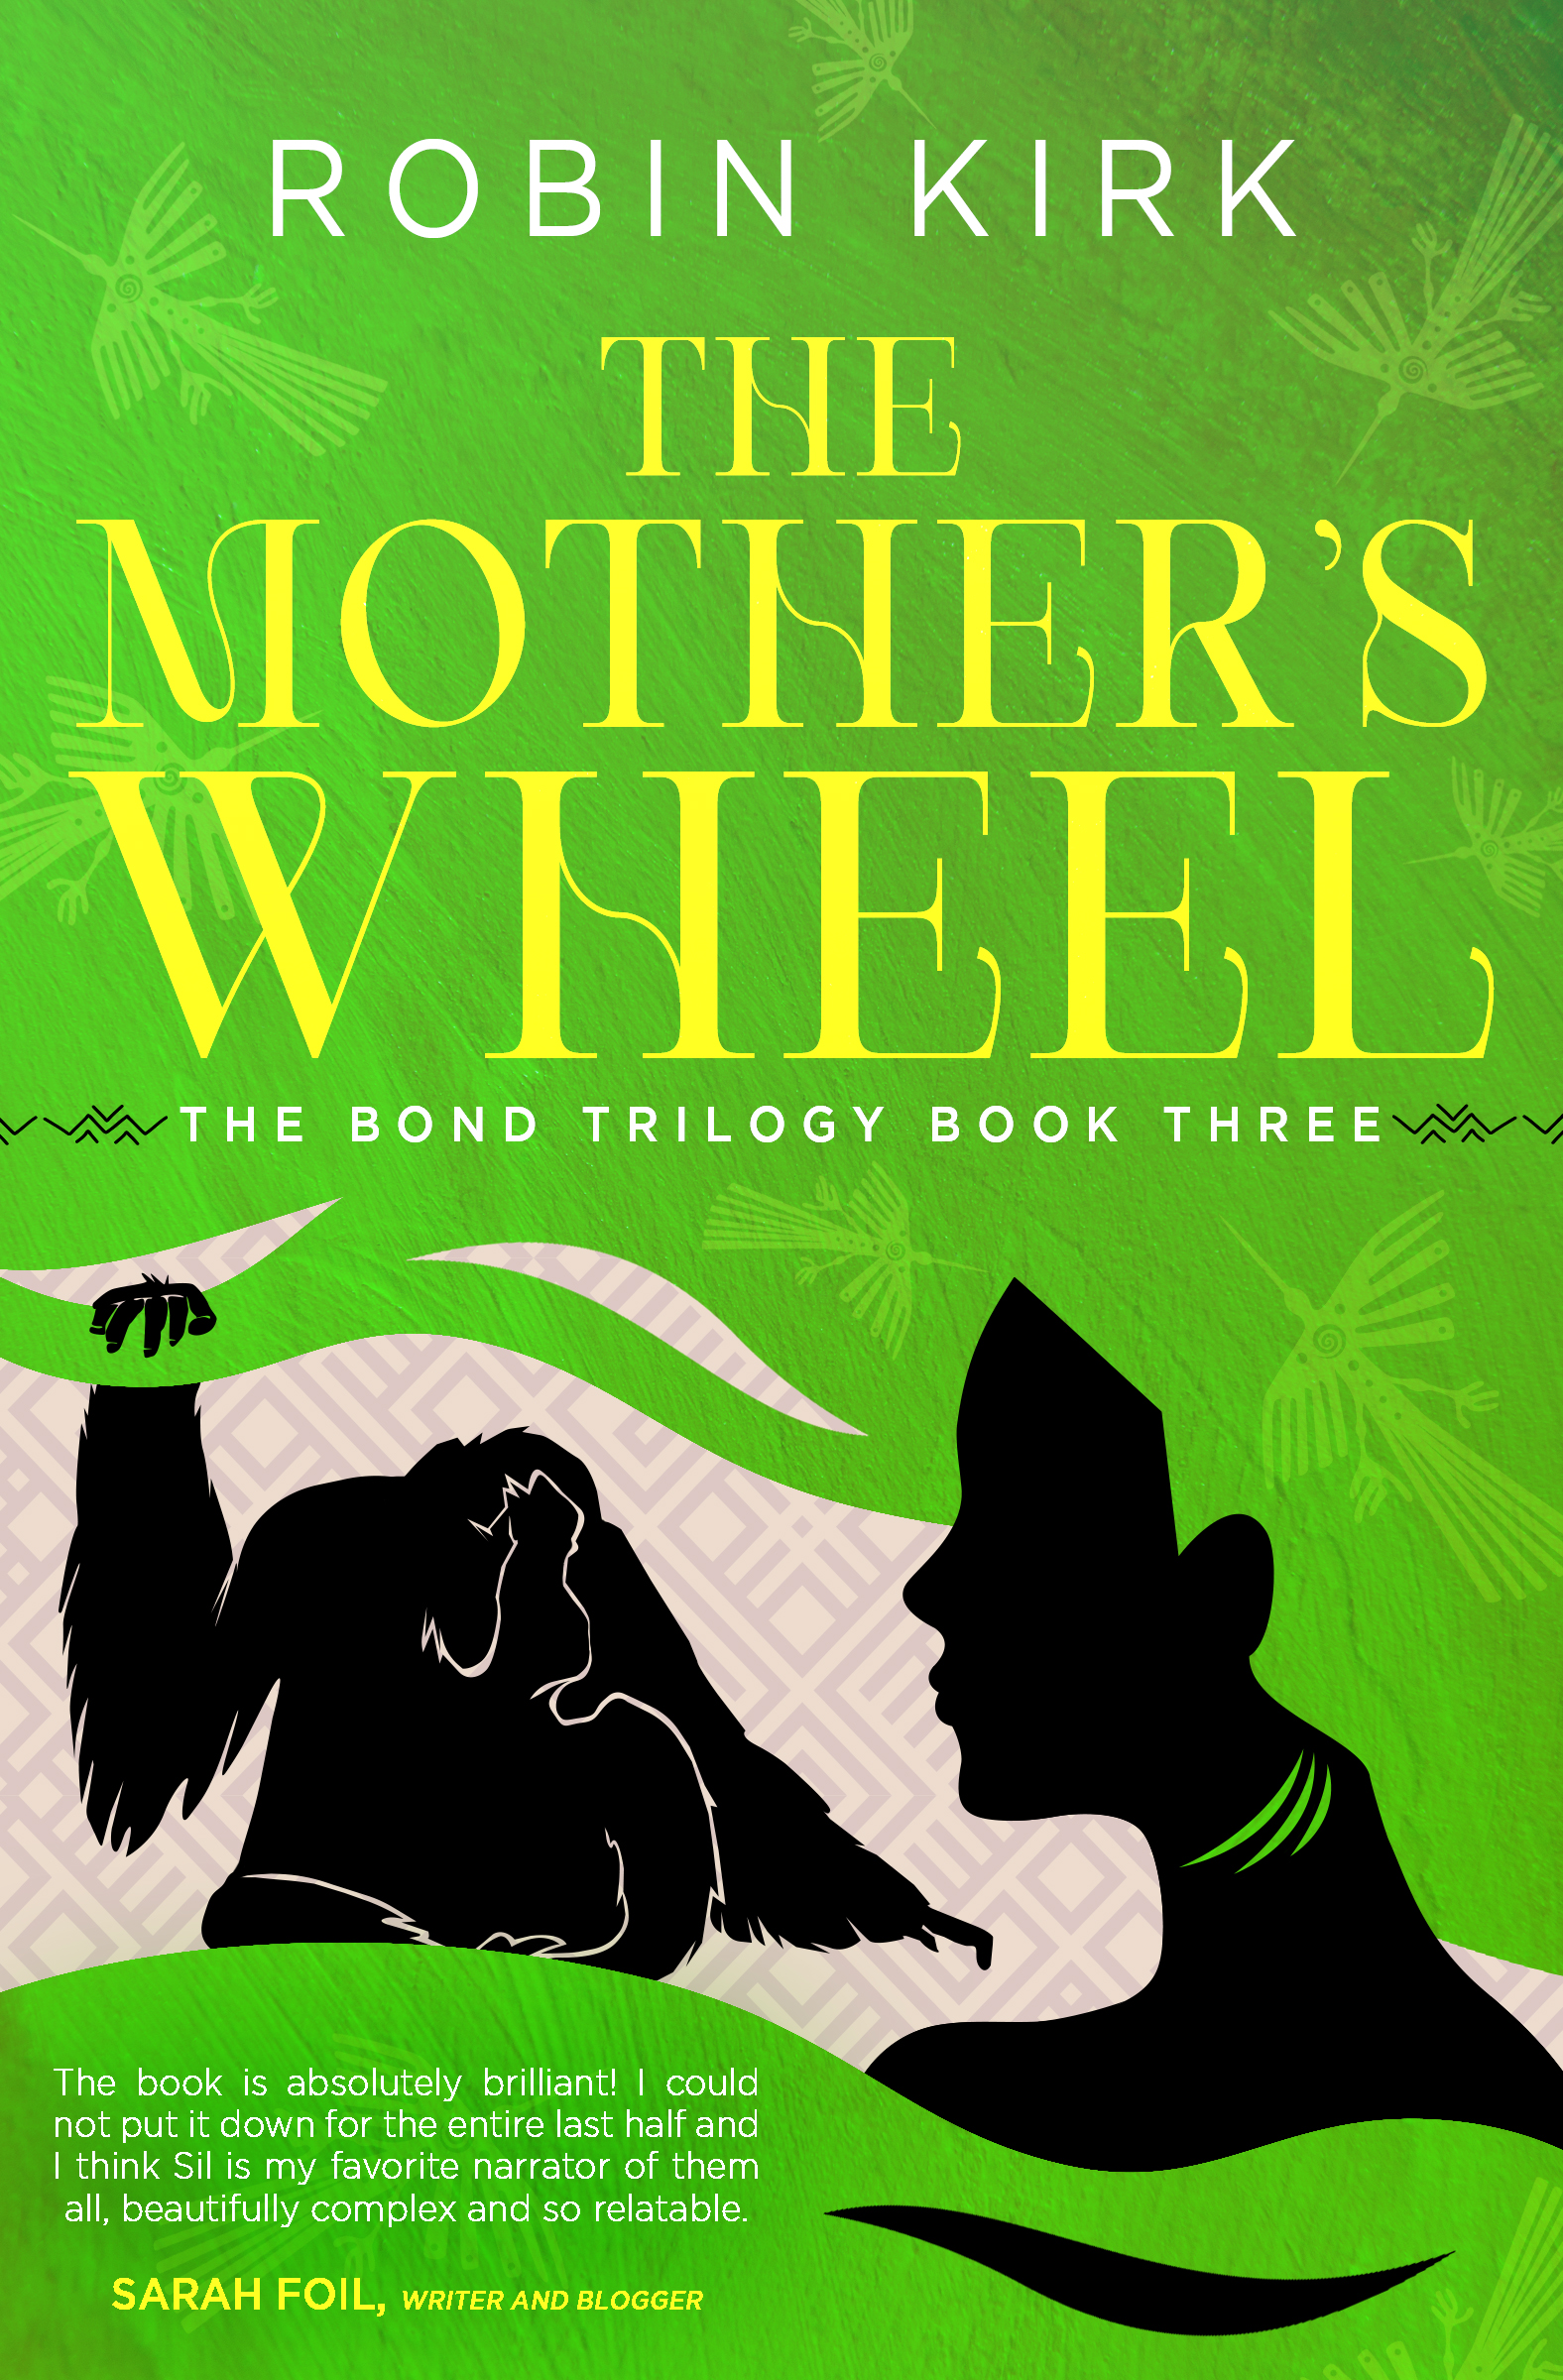 A bright green book cover with a black silhouette of a female and an orangutan